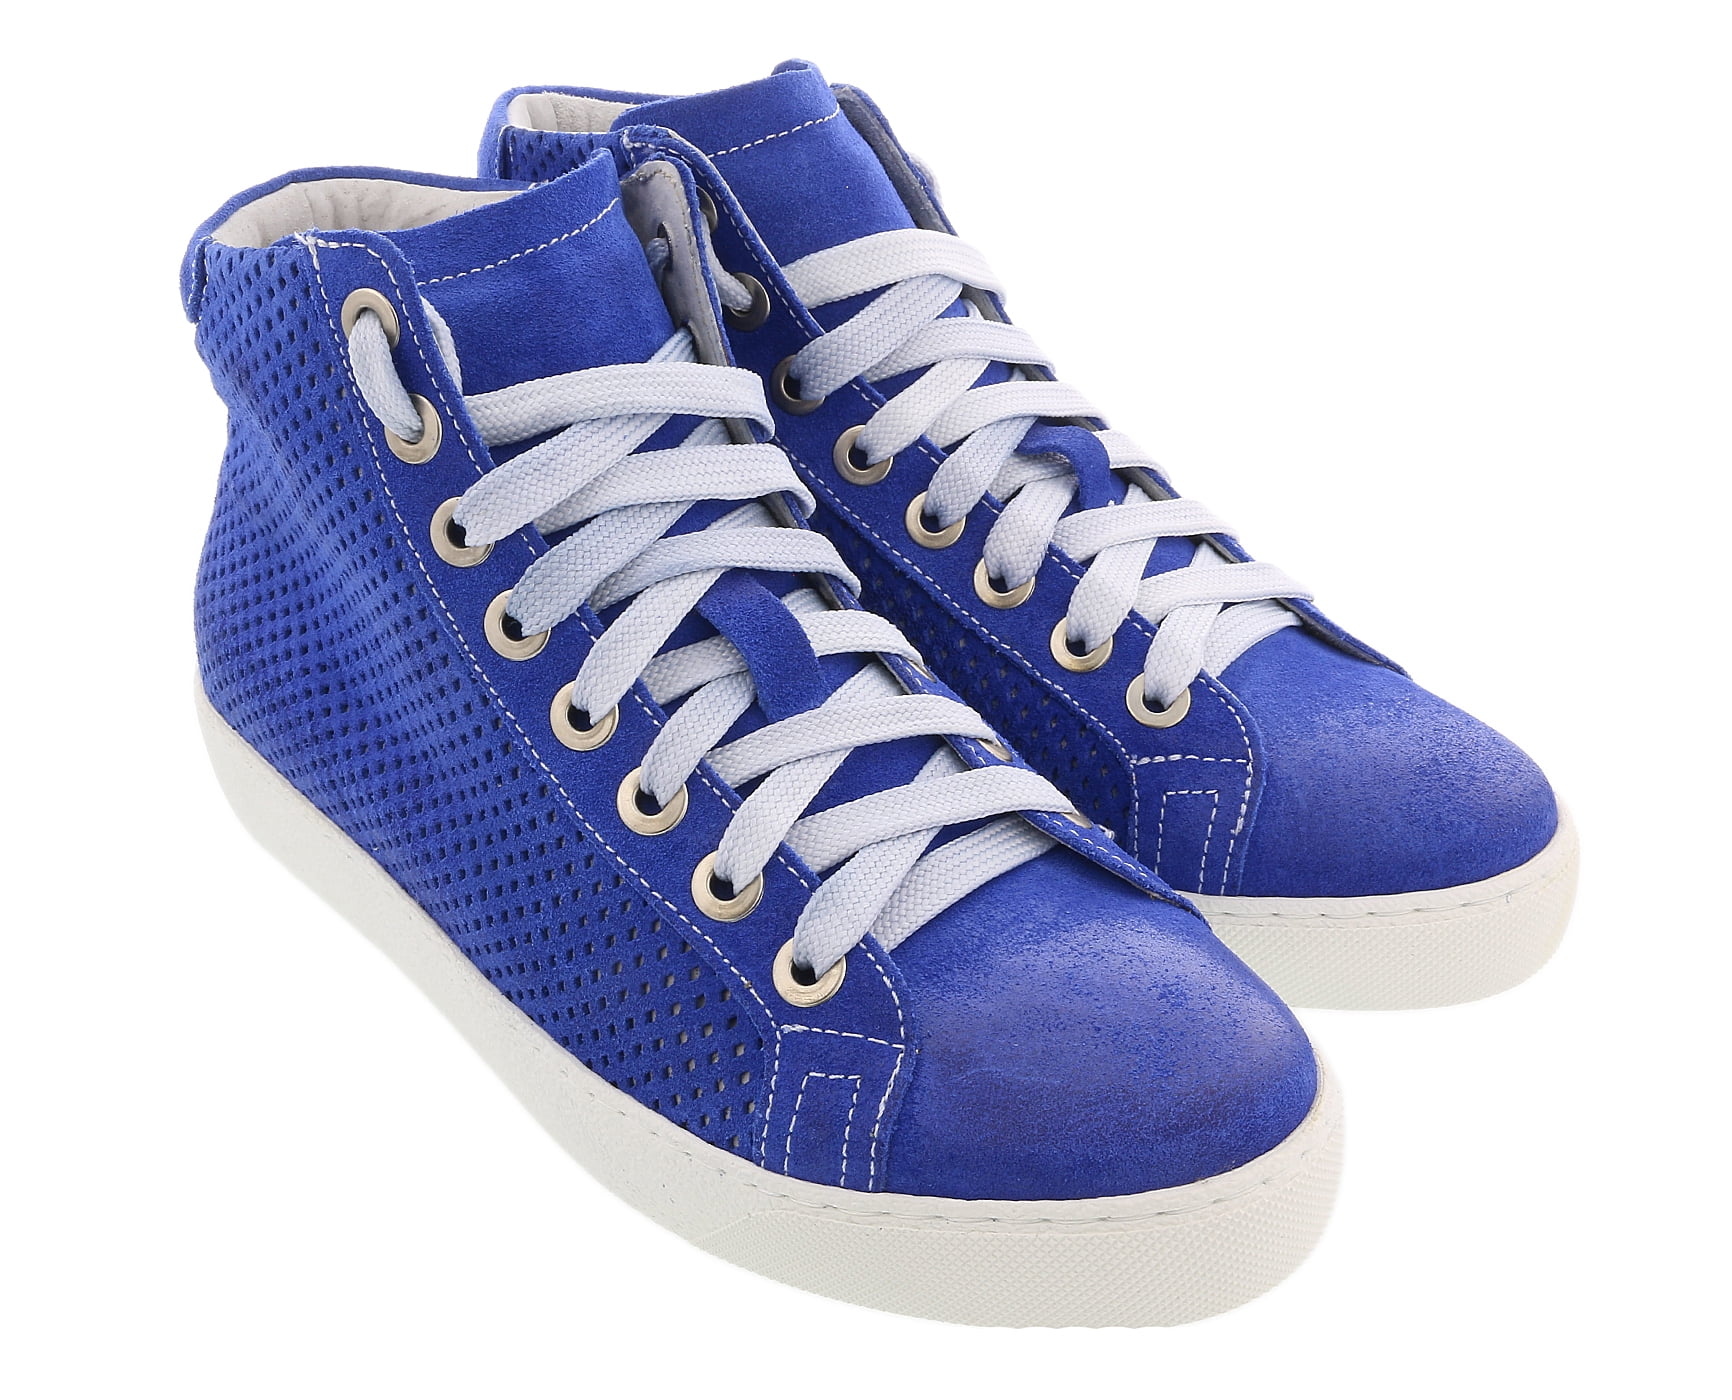 Converse Chuck Taylor All Star Modern Lift Hi suede sneakers in blue | ASOS